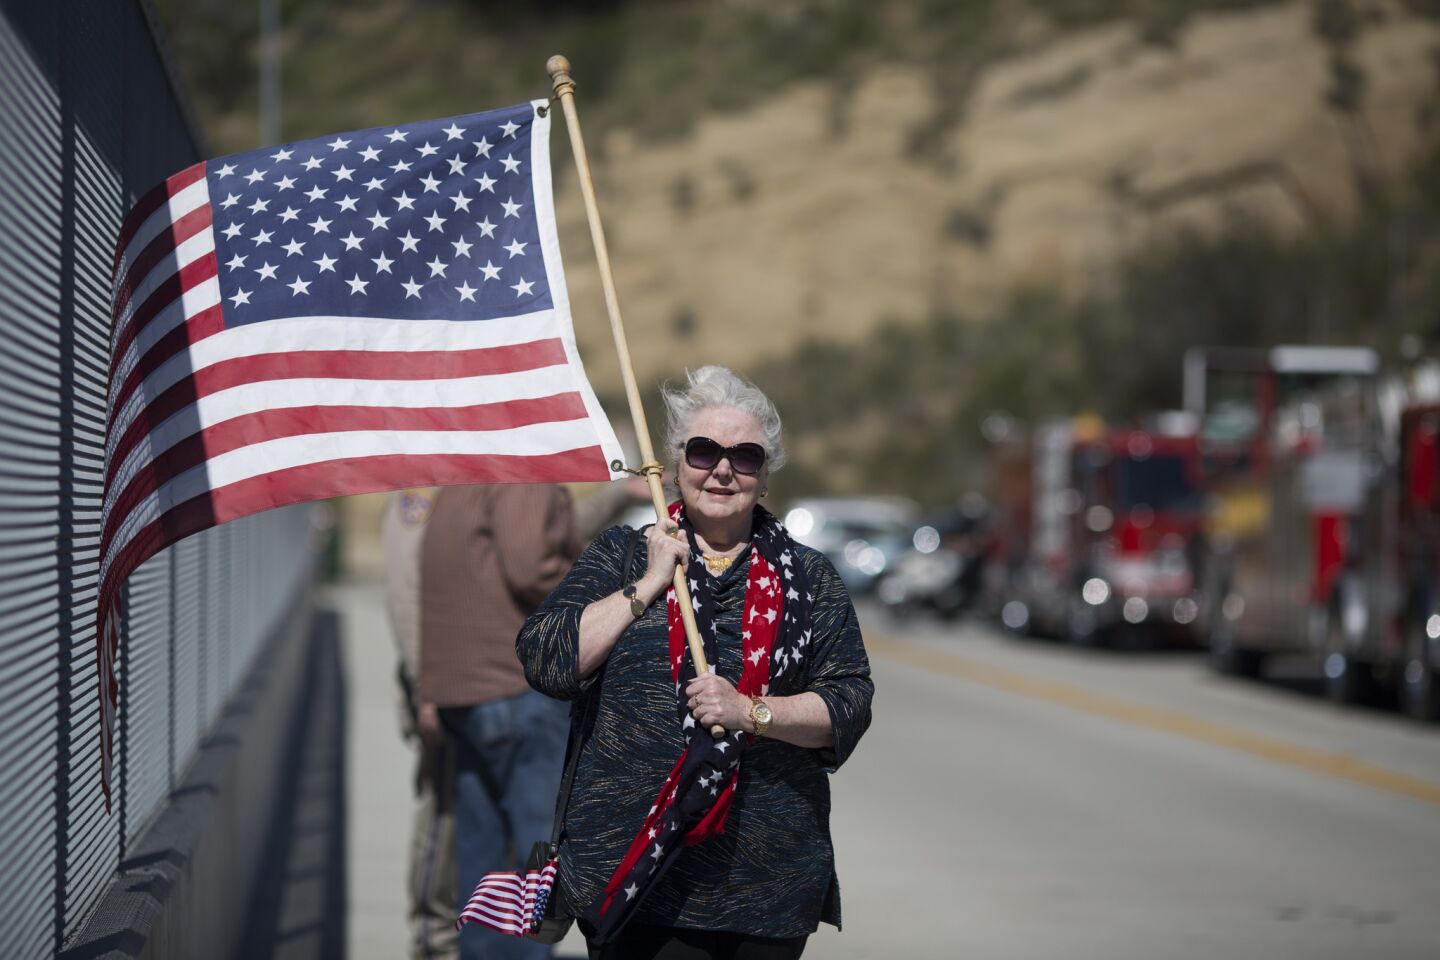 Rachel Handy carries an American flag after watching the motorcade escorting the body of former first lady Nancy Reagan pass by on the Ronald Reagan Freeway en route to the Ronald Reagan Presidential Library.